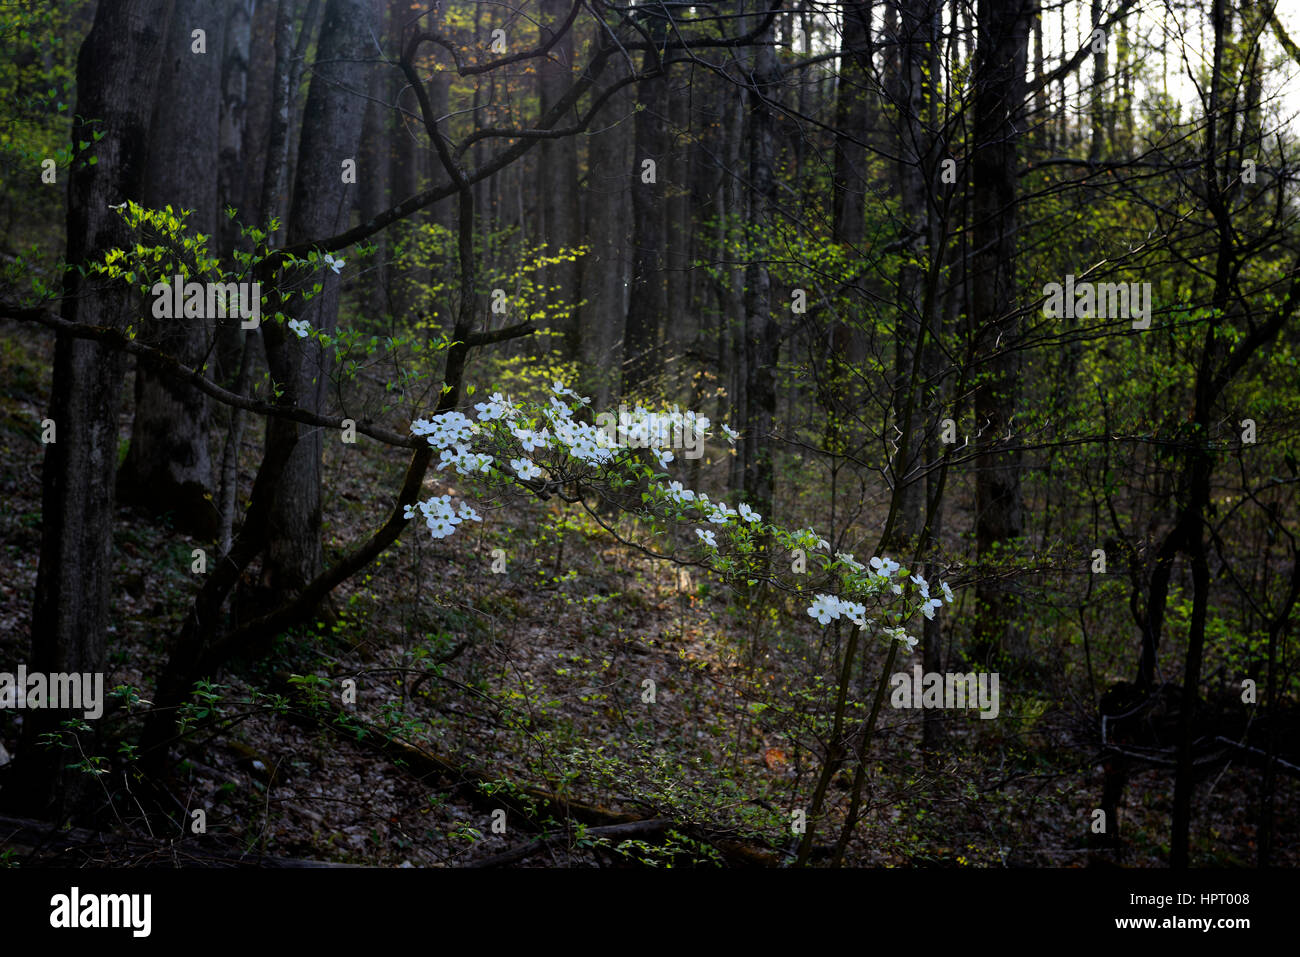 Cornus florida, flowering Dogwood,white, flower, flowers, spring, flowering, bloom, Middle Prong of the Little River, Tremont, Great Smoky Mountains Stock Photo